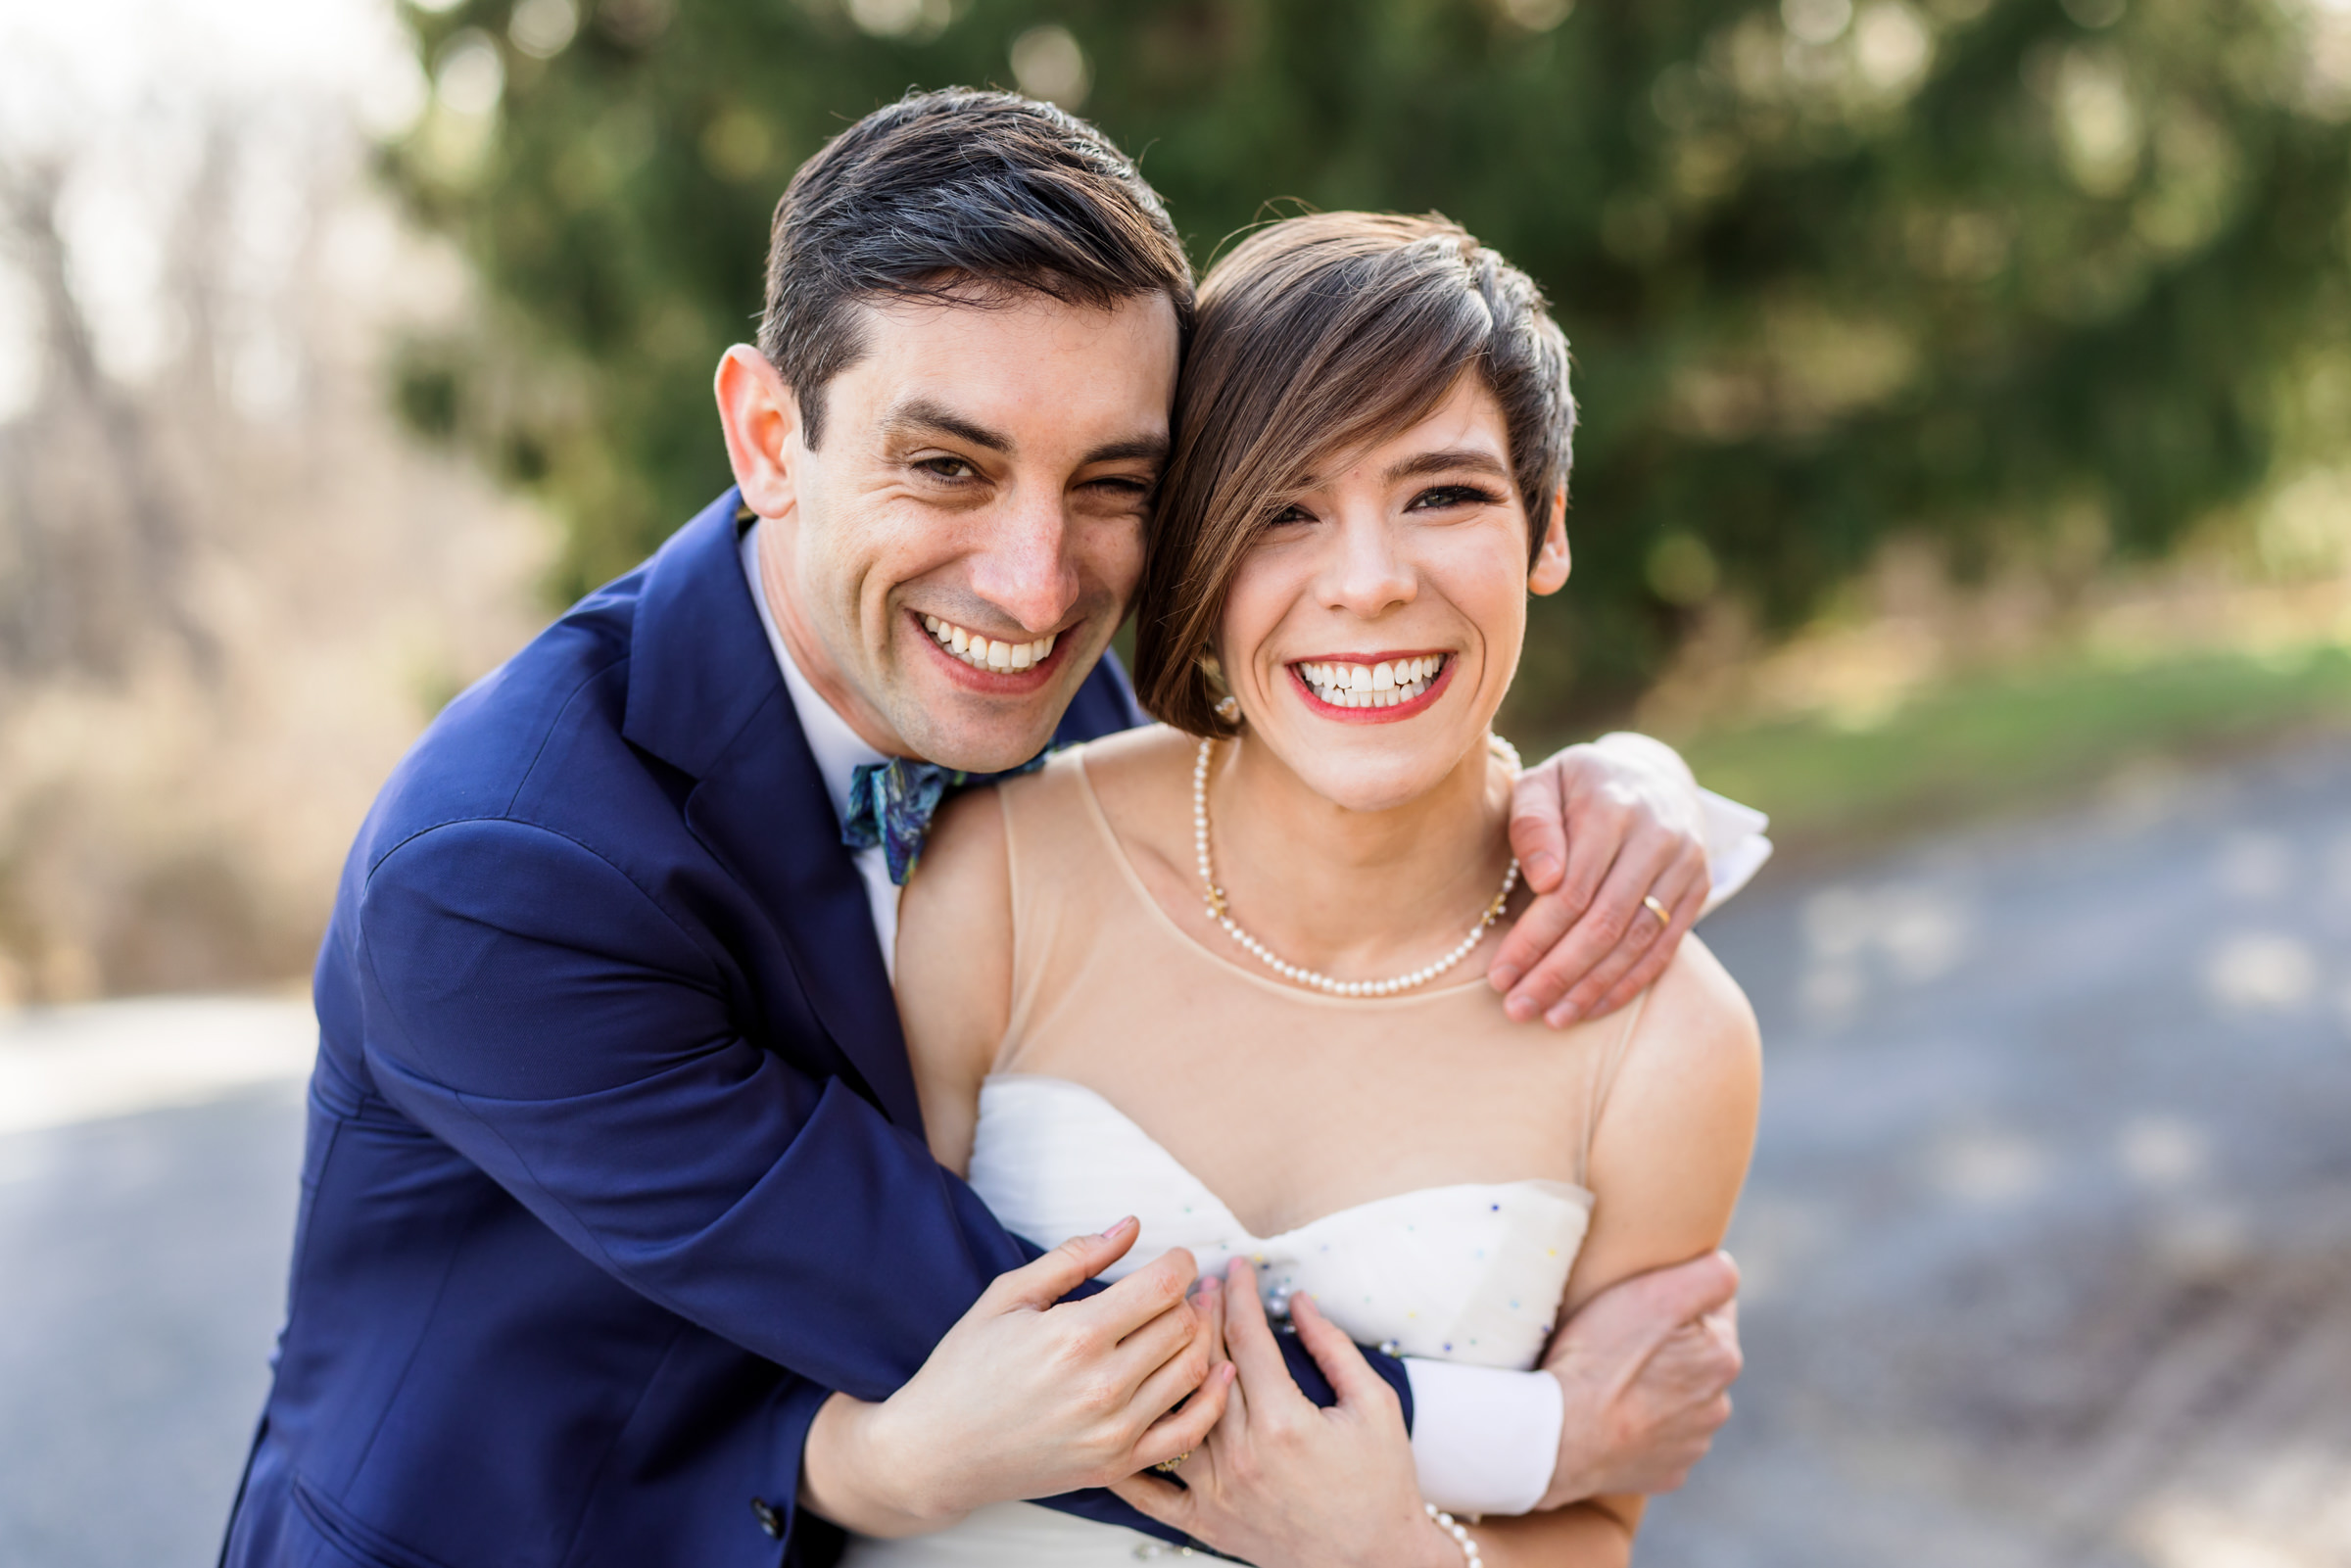 wedding couple embracing and smiling during outdoor portraits